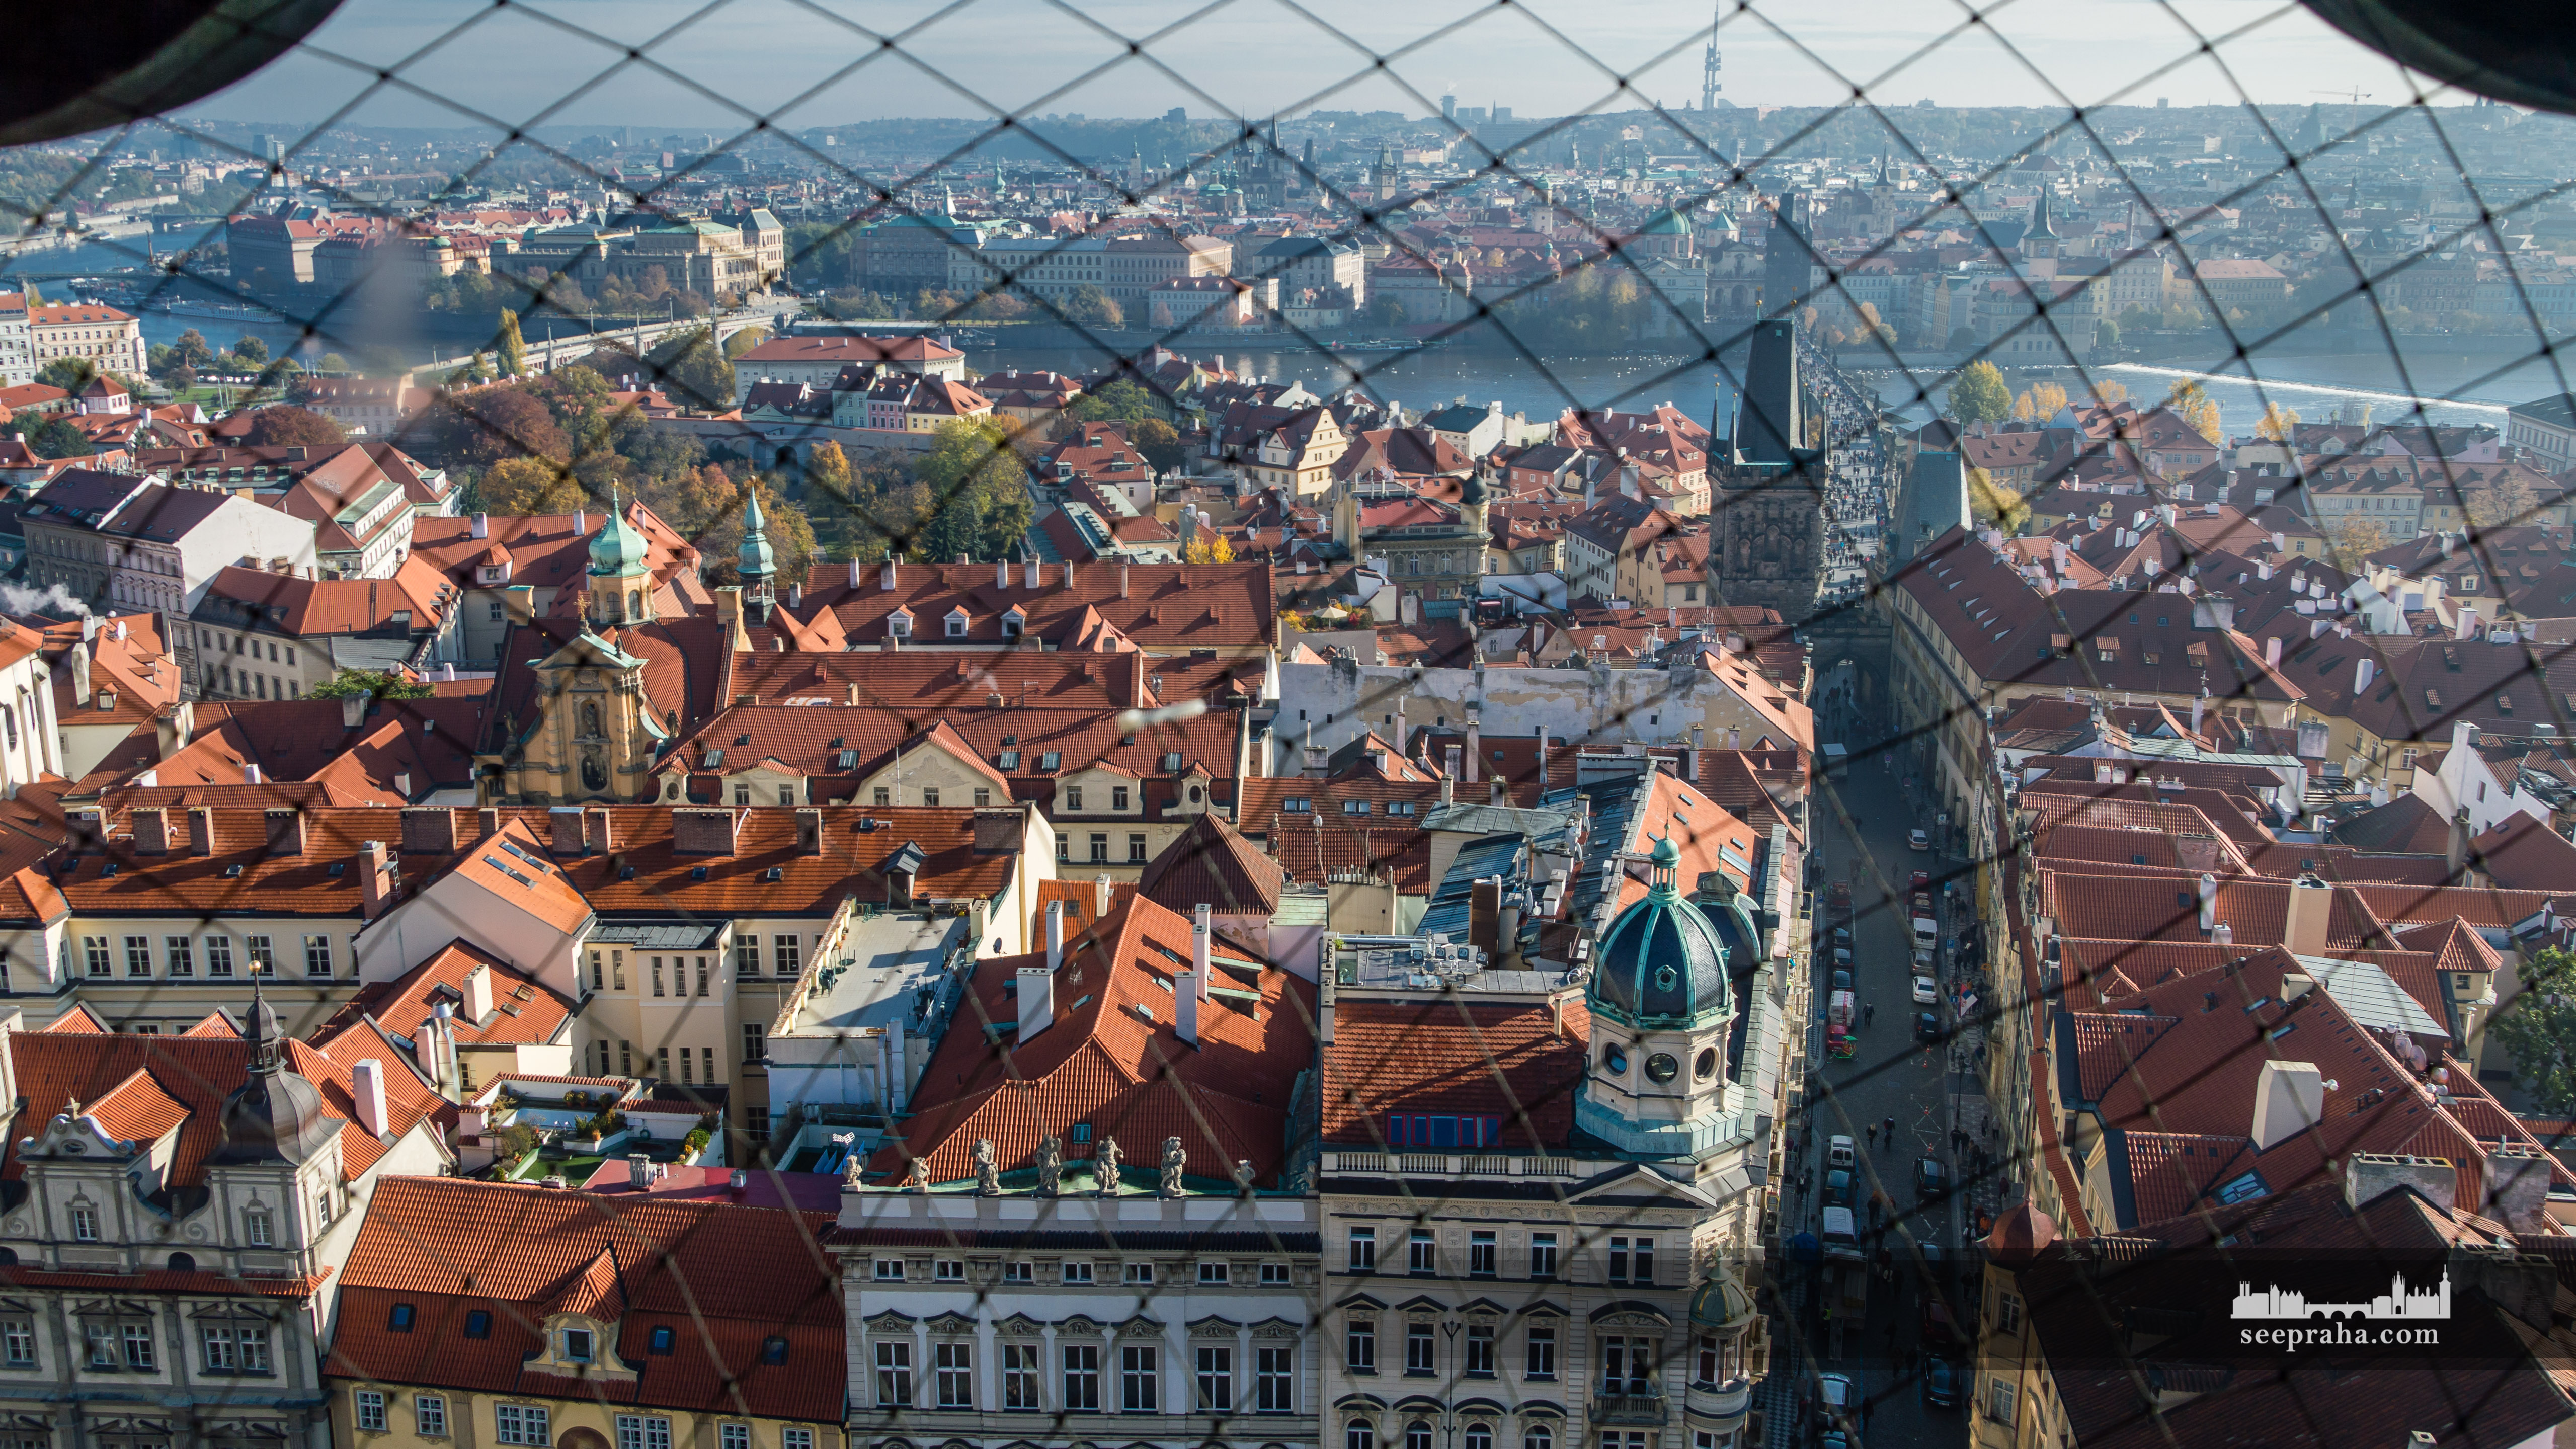 The view from the top of the bell tower of St. Nicholas Church, Prague, Czech Republic